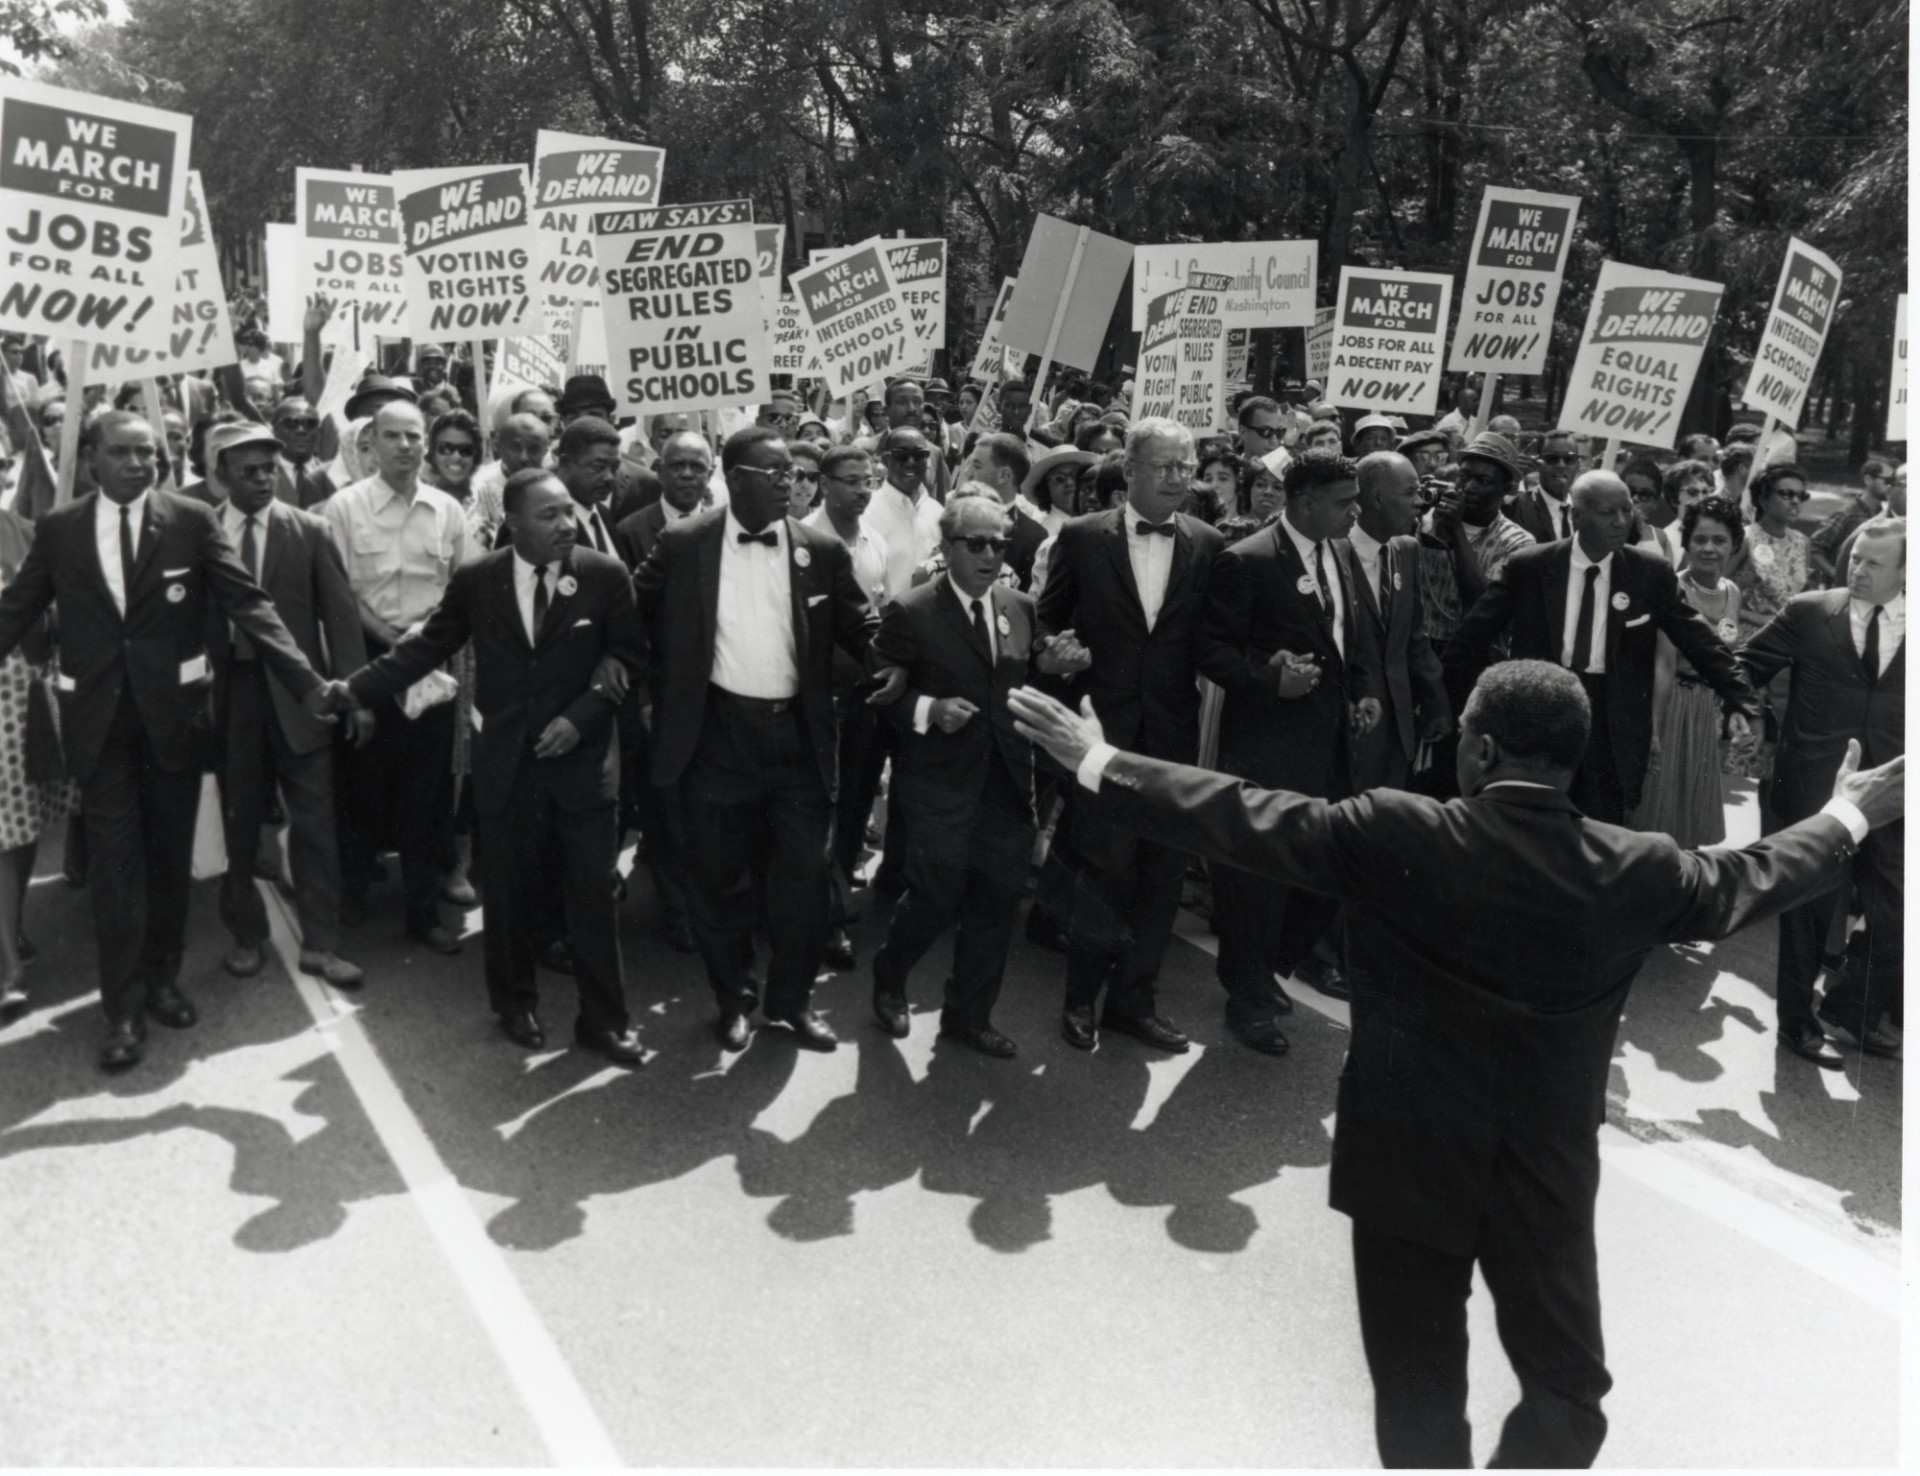 Anti-segregation march featuring Rev. Martin Luther King Jr., second first row from left. Source: Athena LeTrelle, on Flickr. CC BY-ND 2.0.